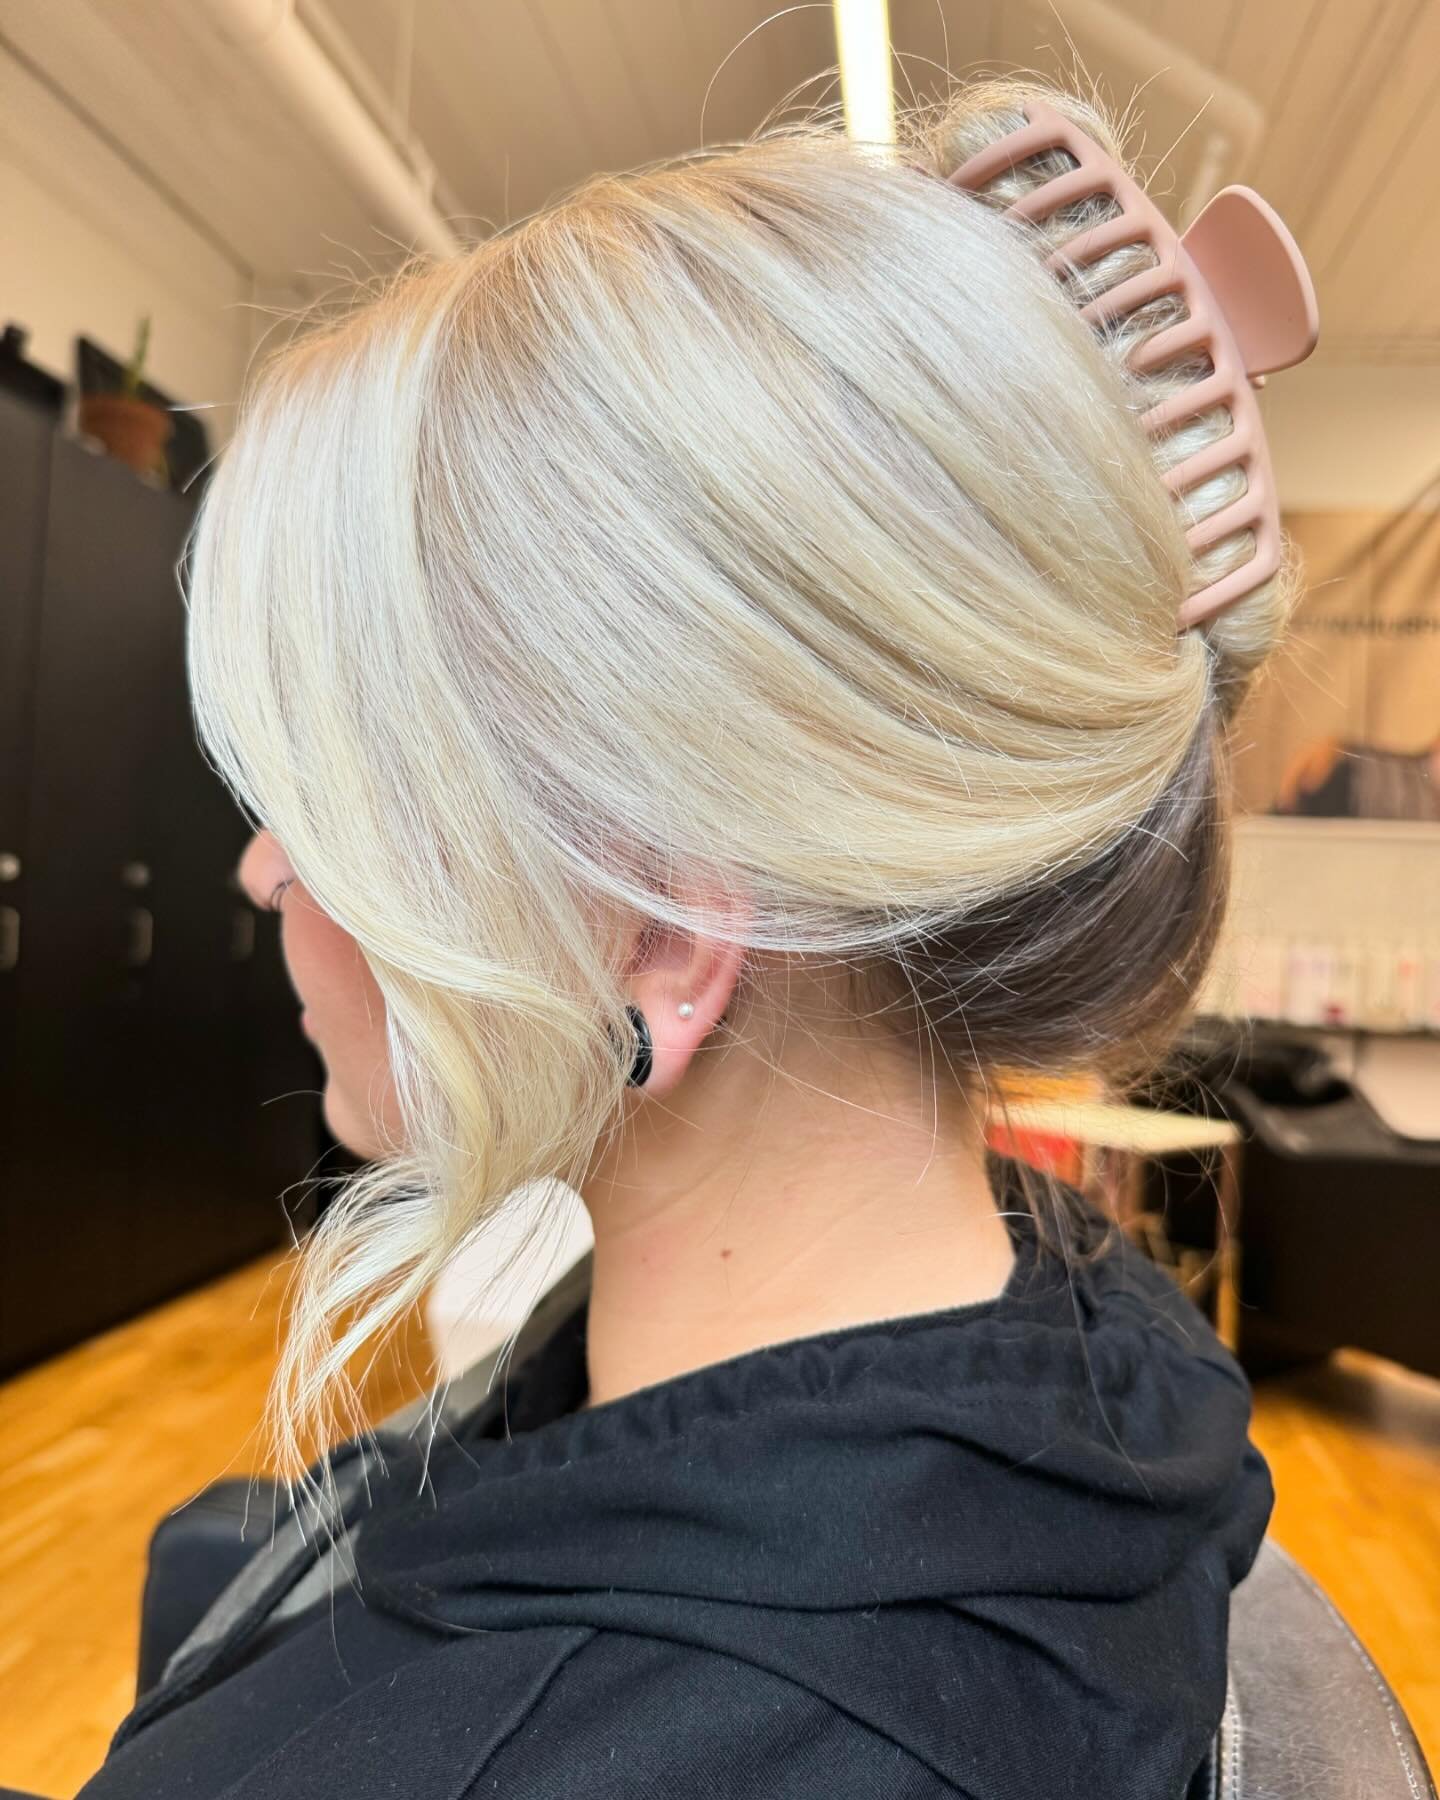 She likes it natural underneath, and I like the reminder of how blonde I got that hair! #blondebysarahp #omaha #omahahair #omahahairsalon #omahahairstylst #thesaltyblondeoldmarket